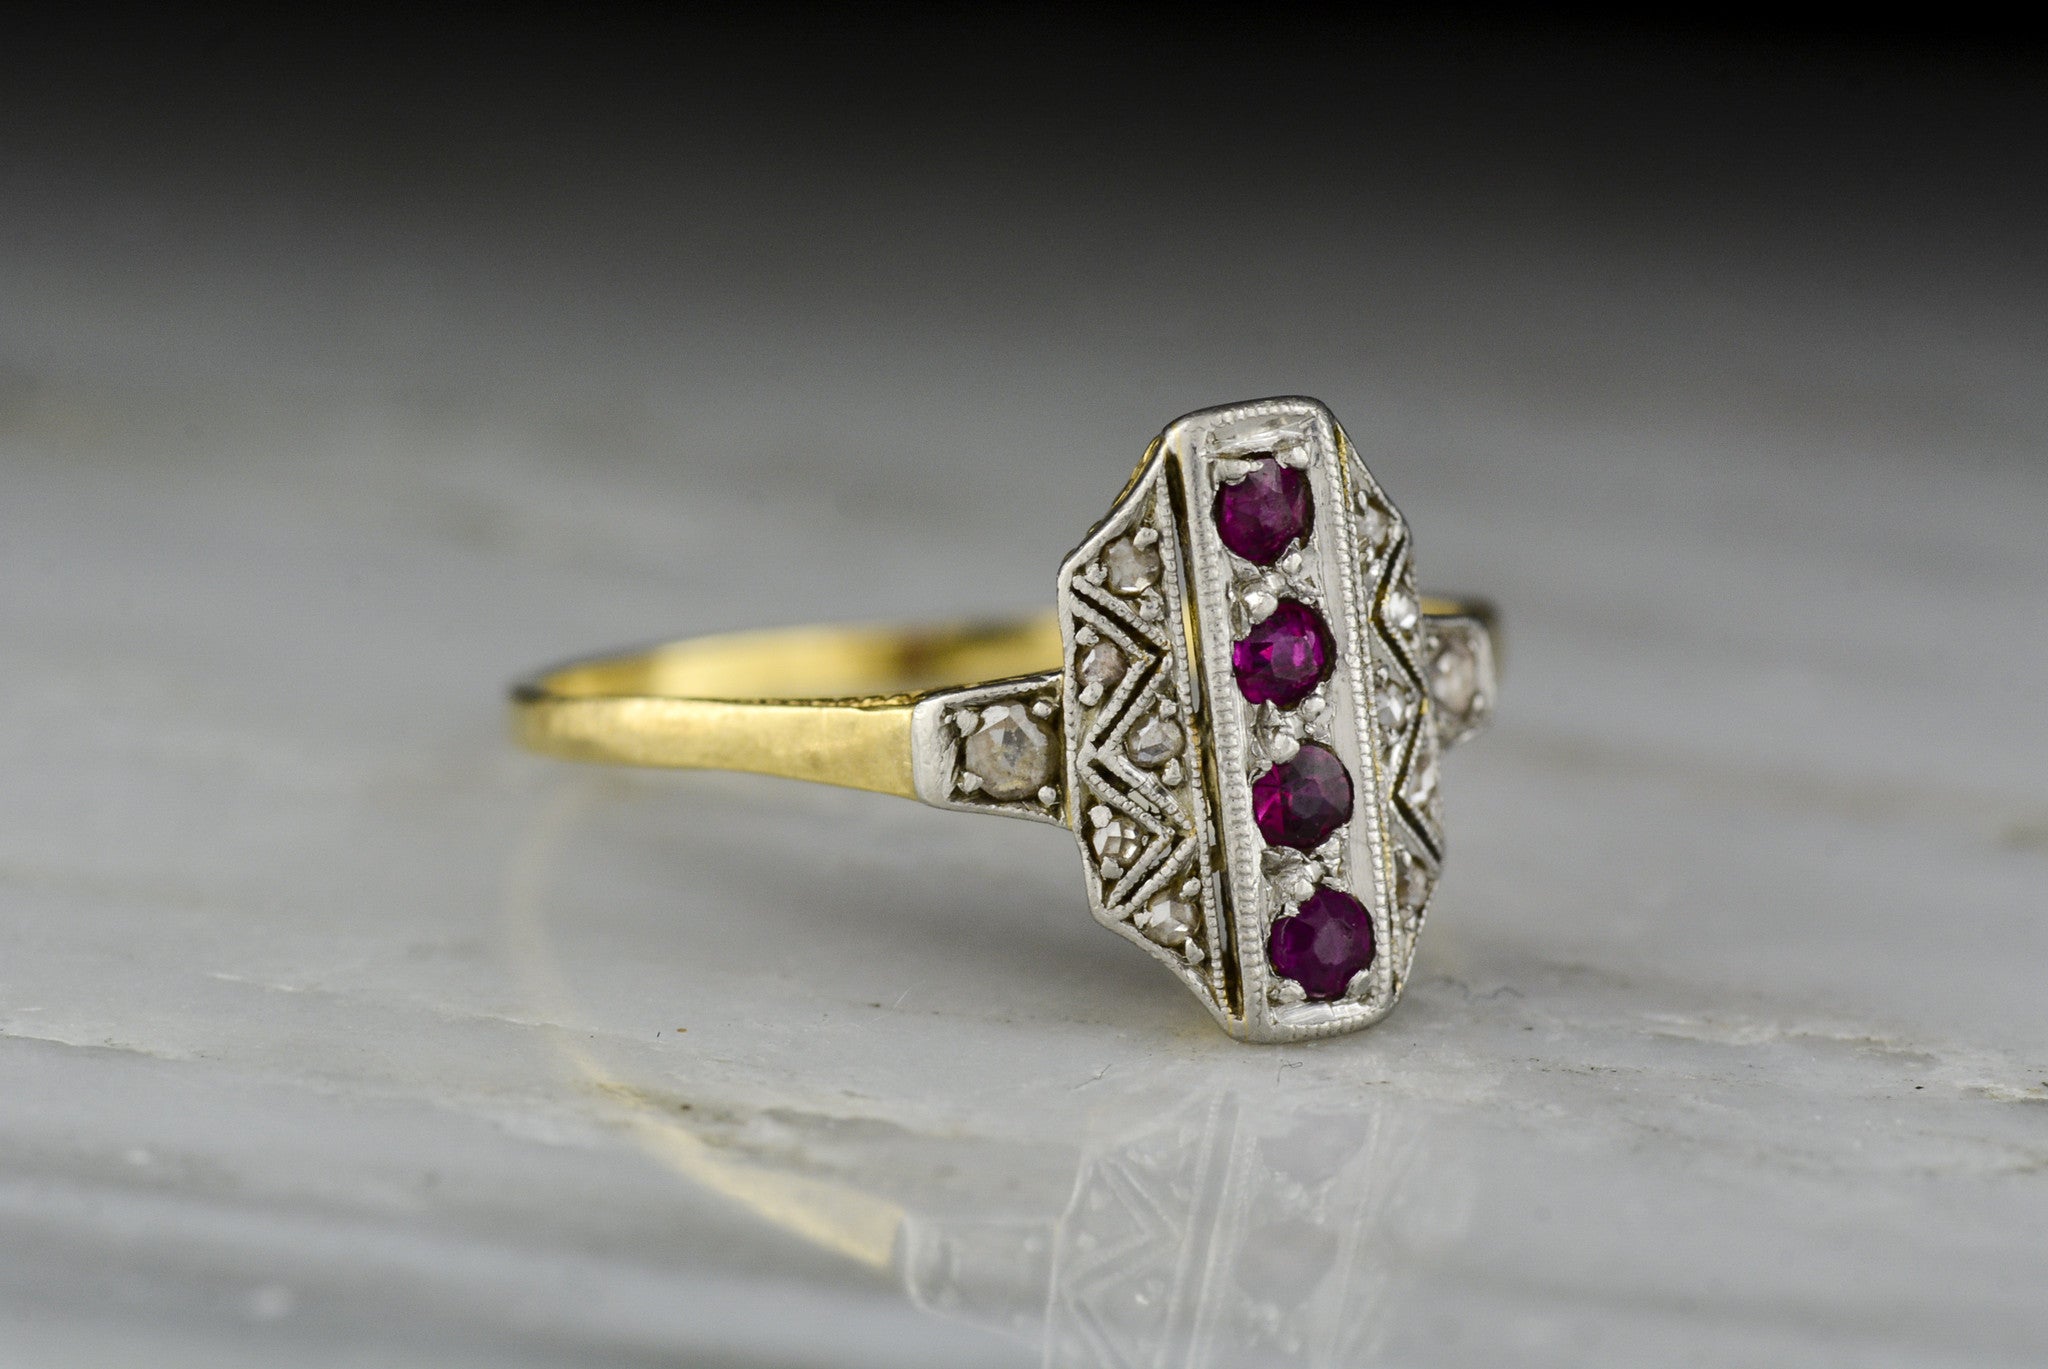 Antique Art Deco, Victorian Revival Gold, Ruby, and Diamond Cocktail R ...